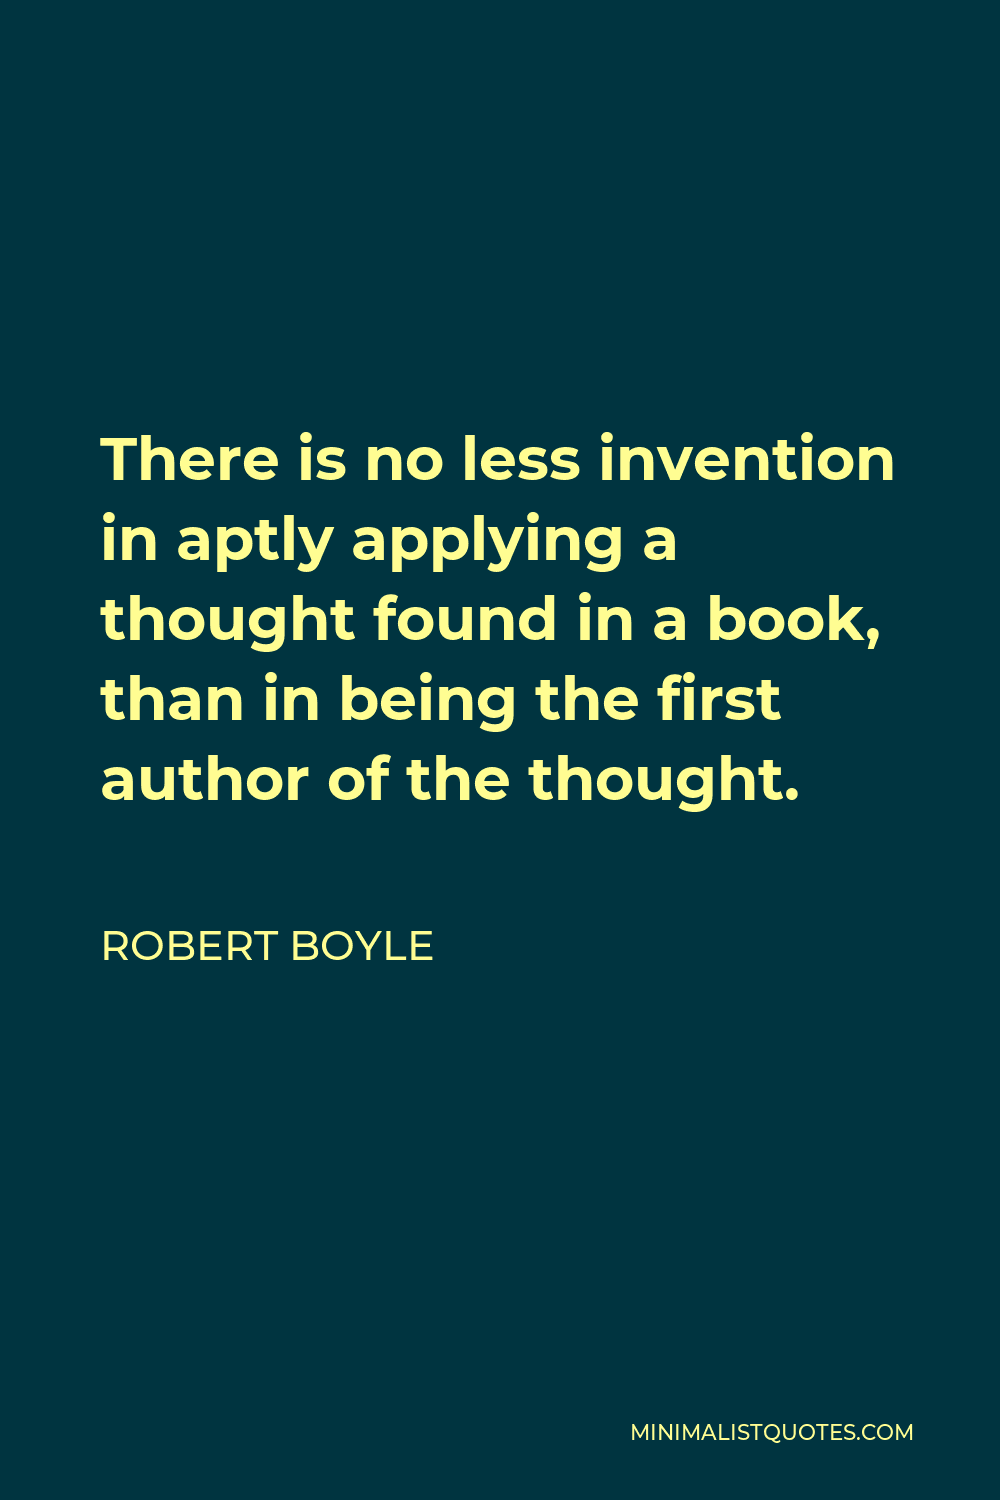 Robert Boyle Quote - There is no less invention in aptly applying a thought found in a book, than in being the first author of the thought.